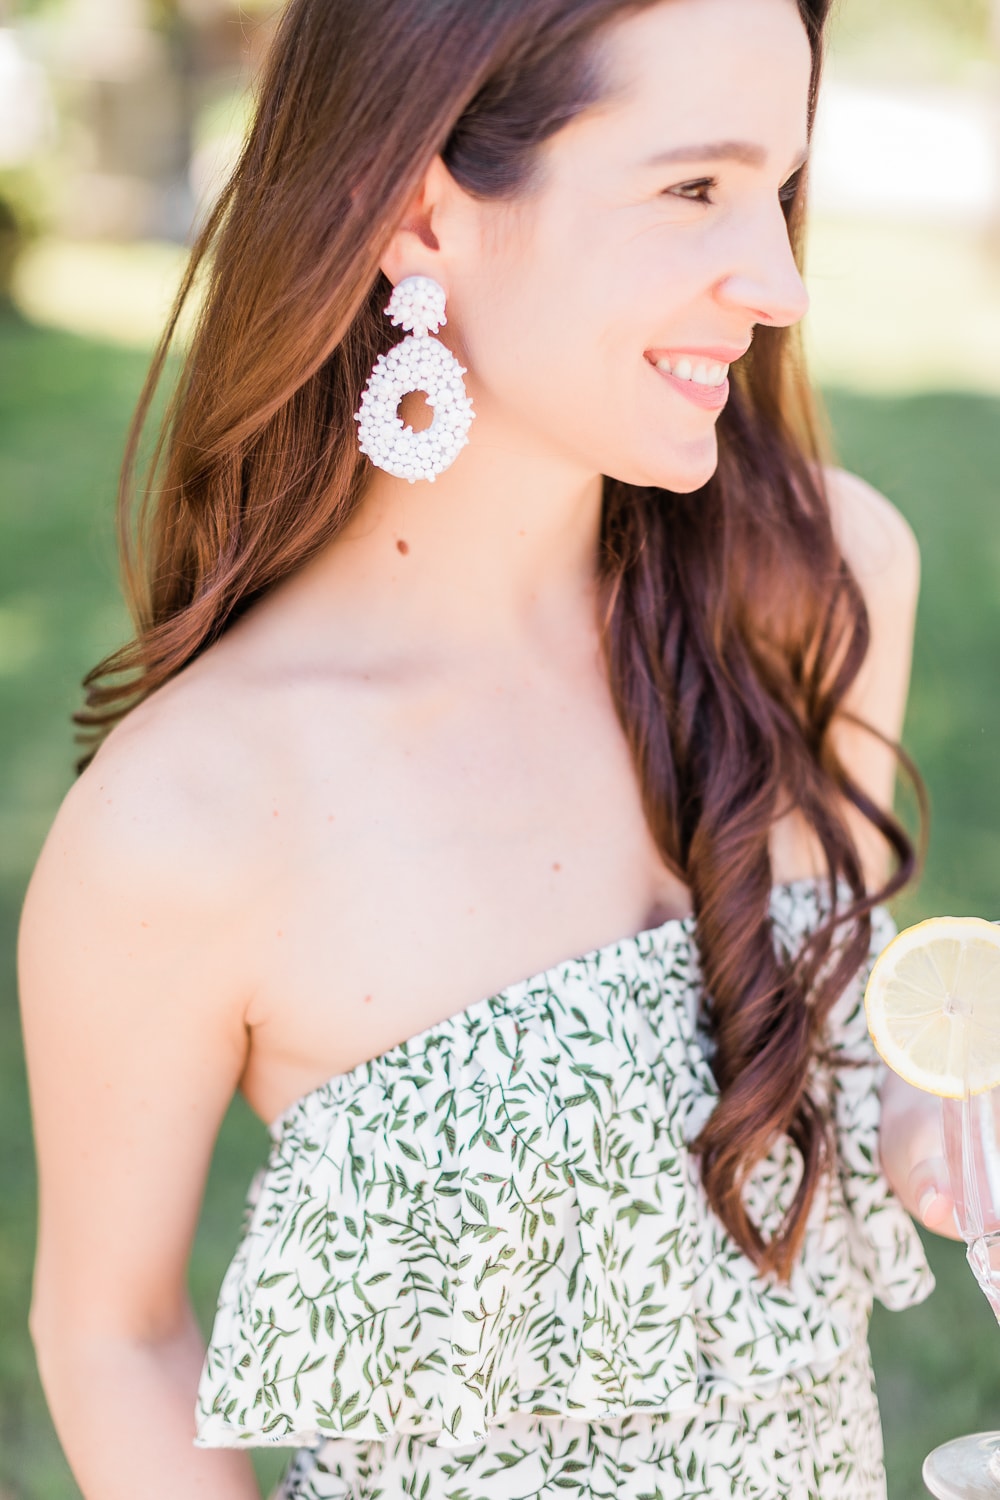 Amazon white beaded statement earrings styled by affordable fashion blogger Stephanie Ziajka on Diary of a Debutante